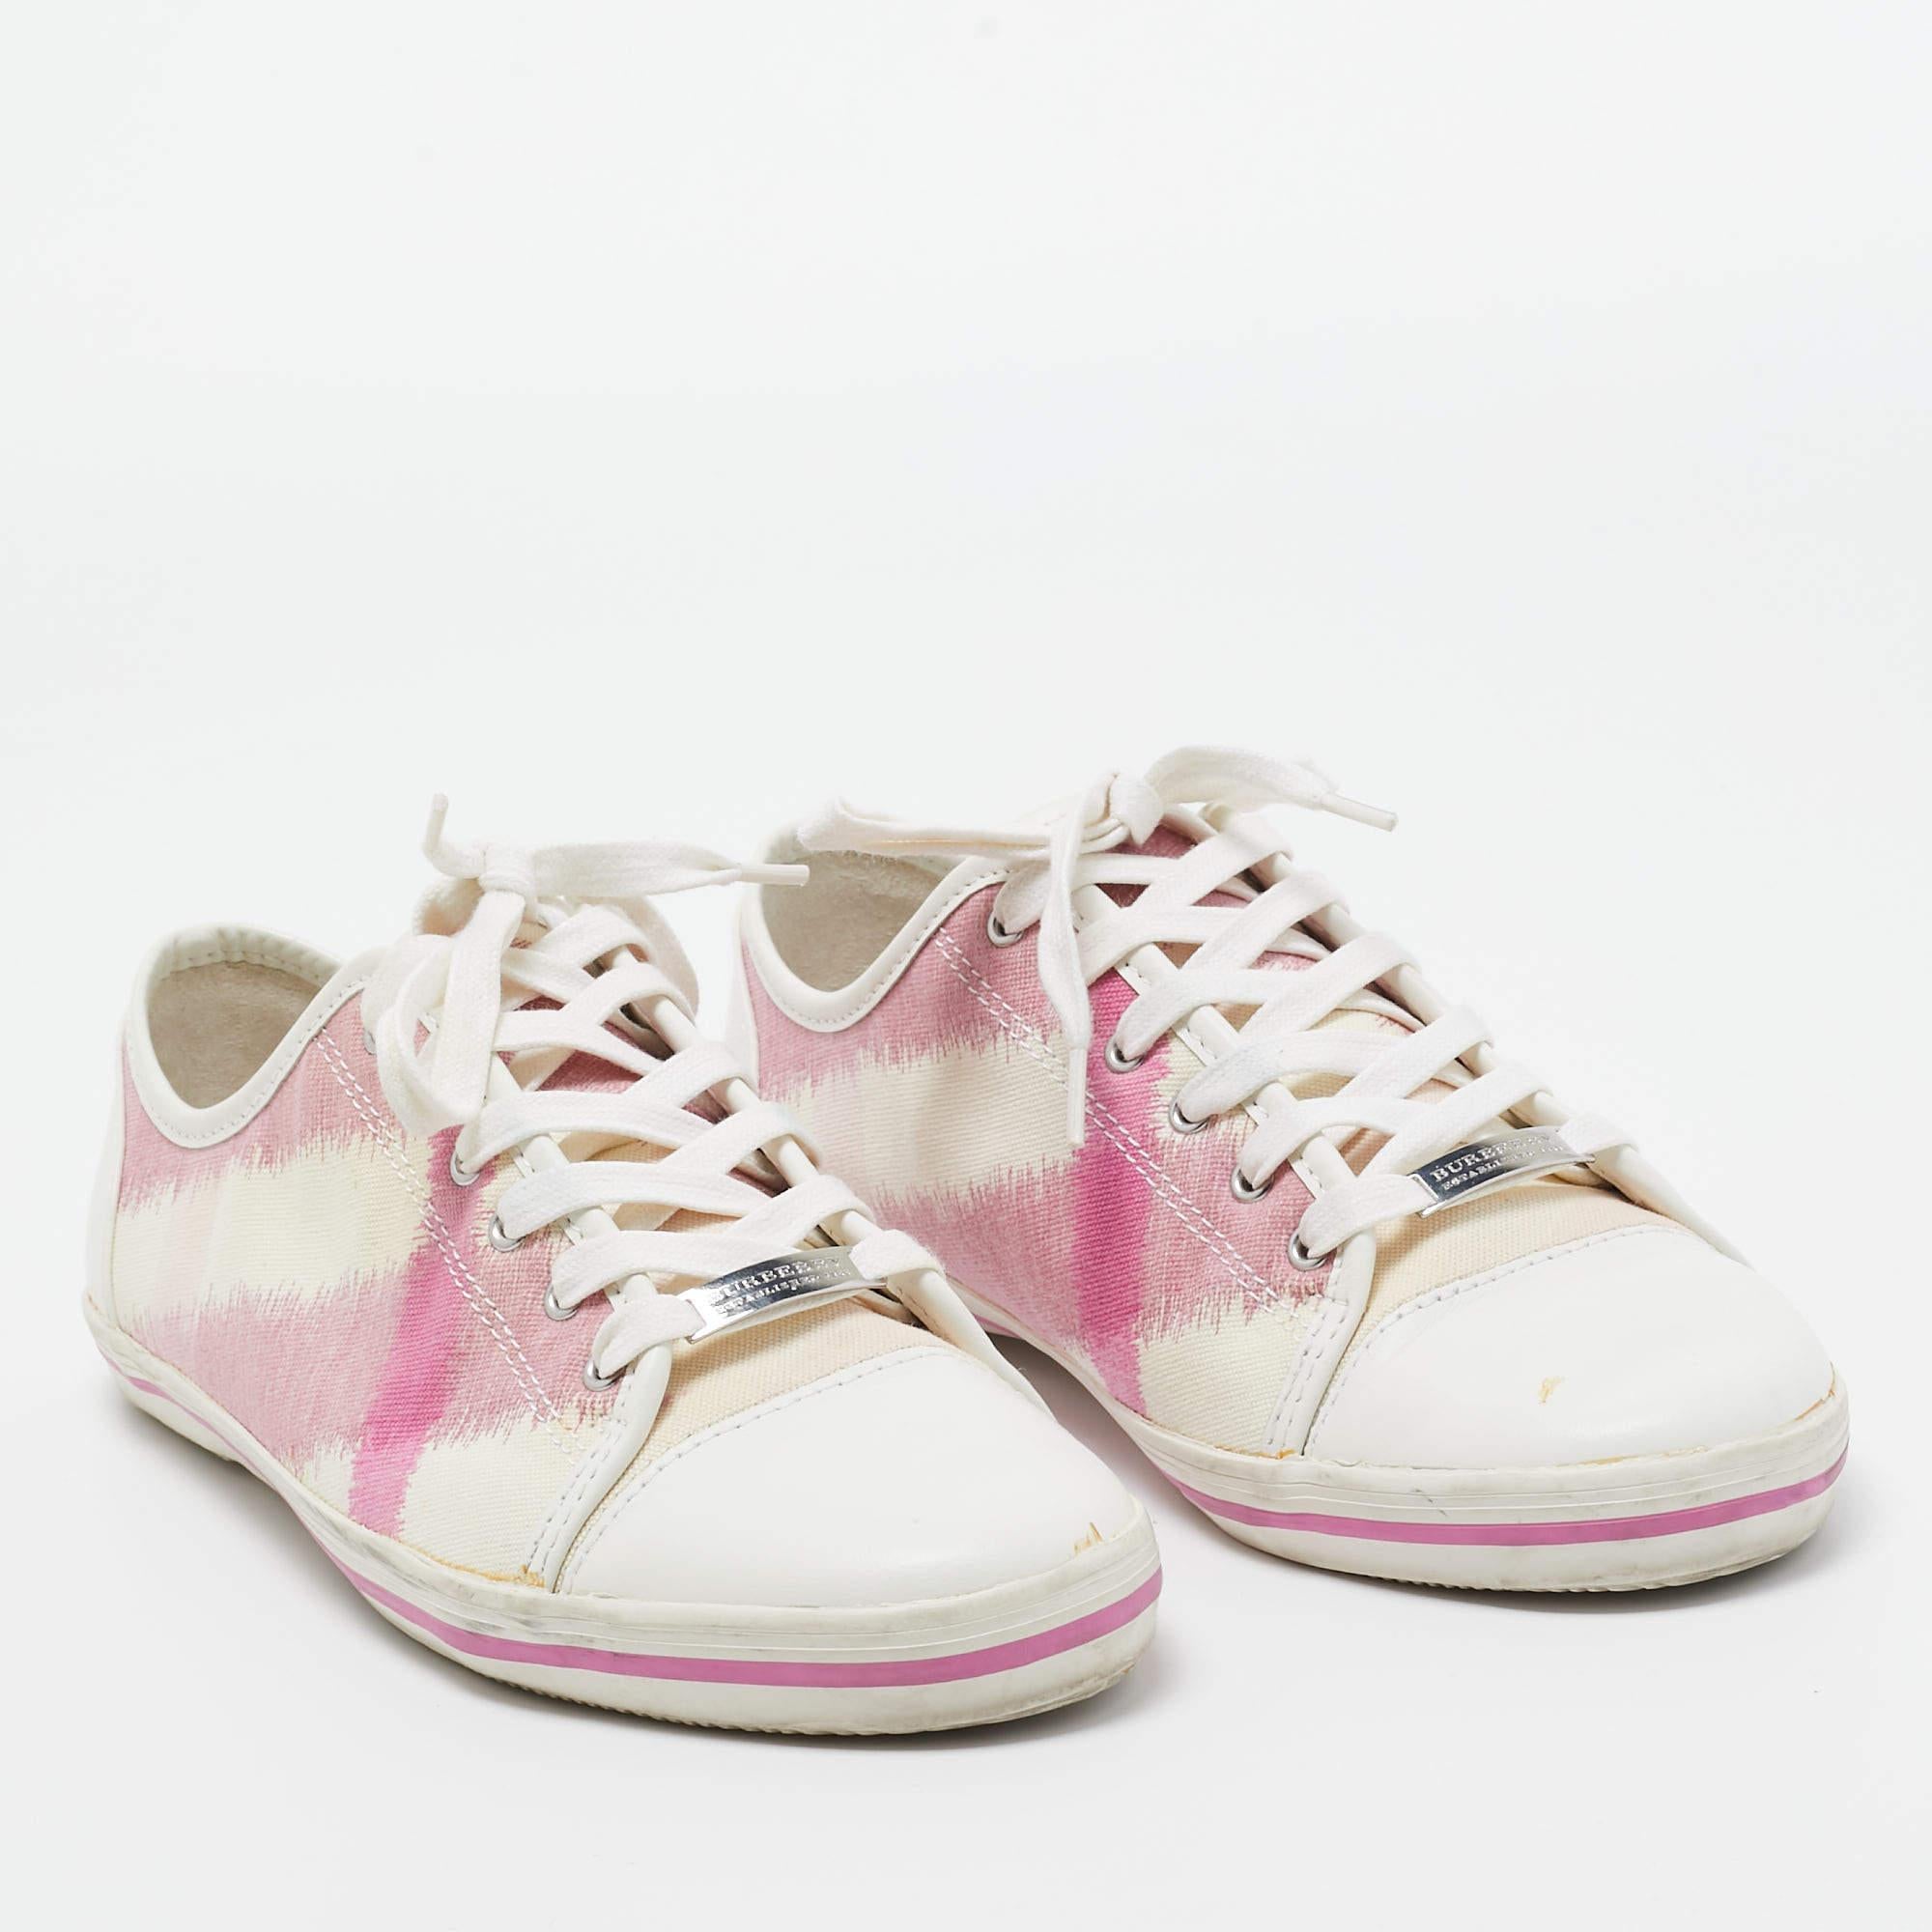 Burberry Pink/White Leather and Canvas Cap Toe Low Top Sneakers Size 41 In Good Condition For Sale In Dubai, Al Qouz 2